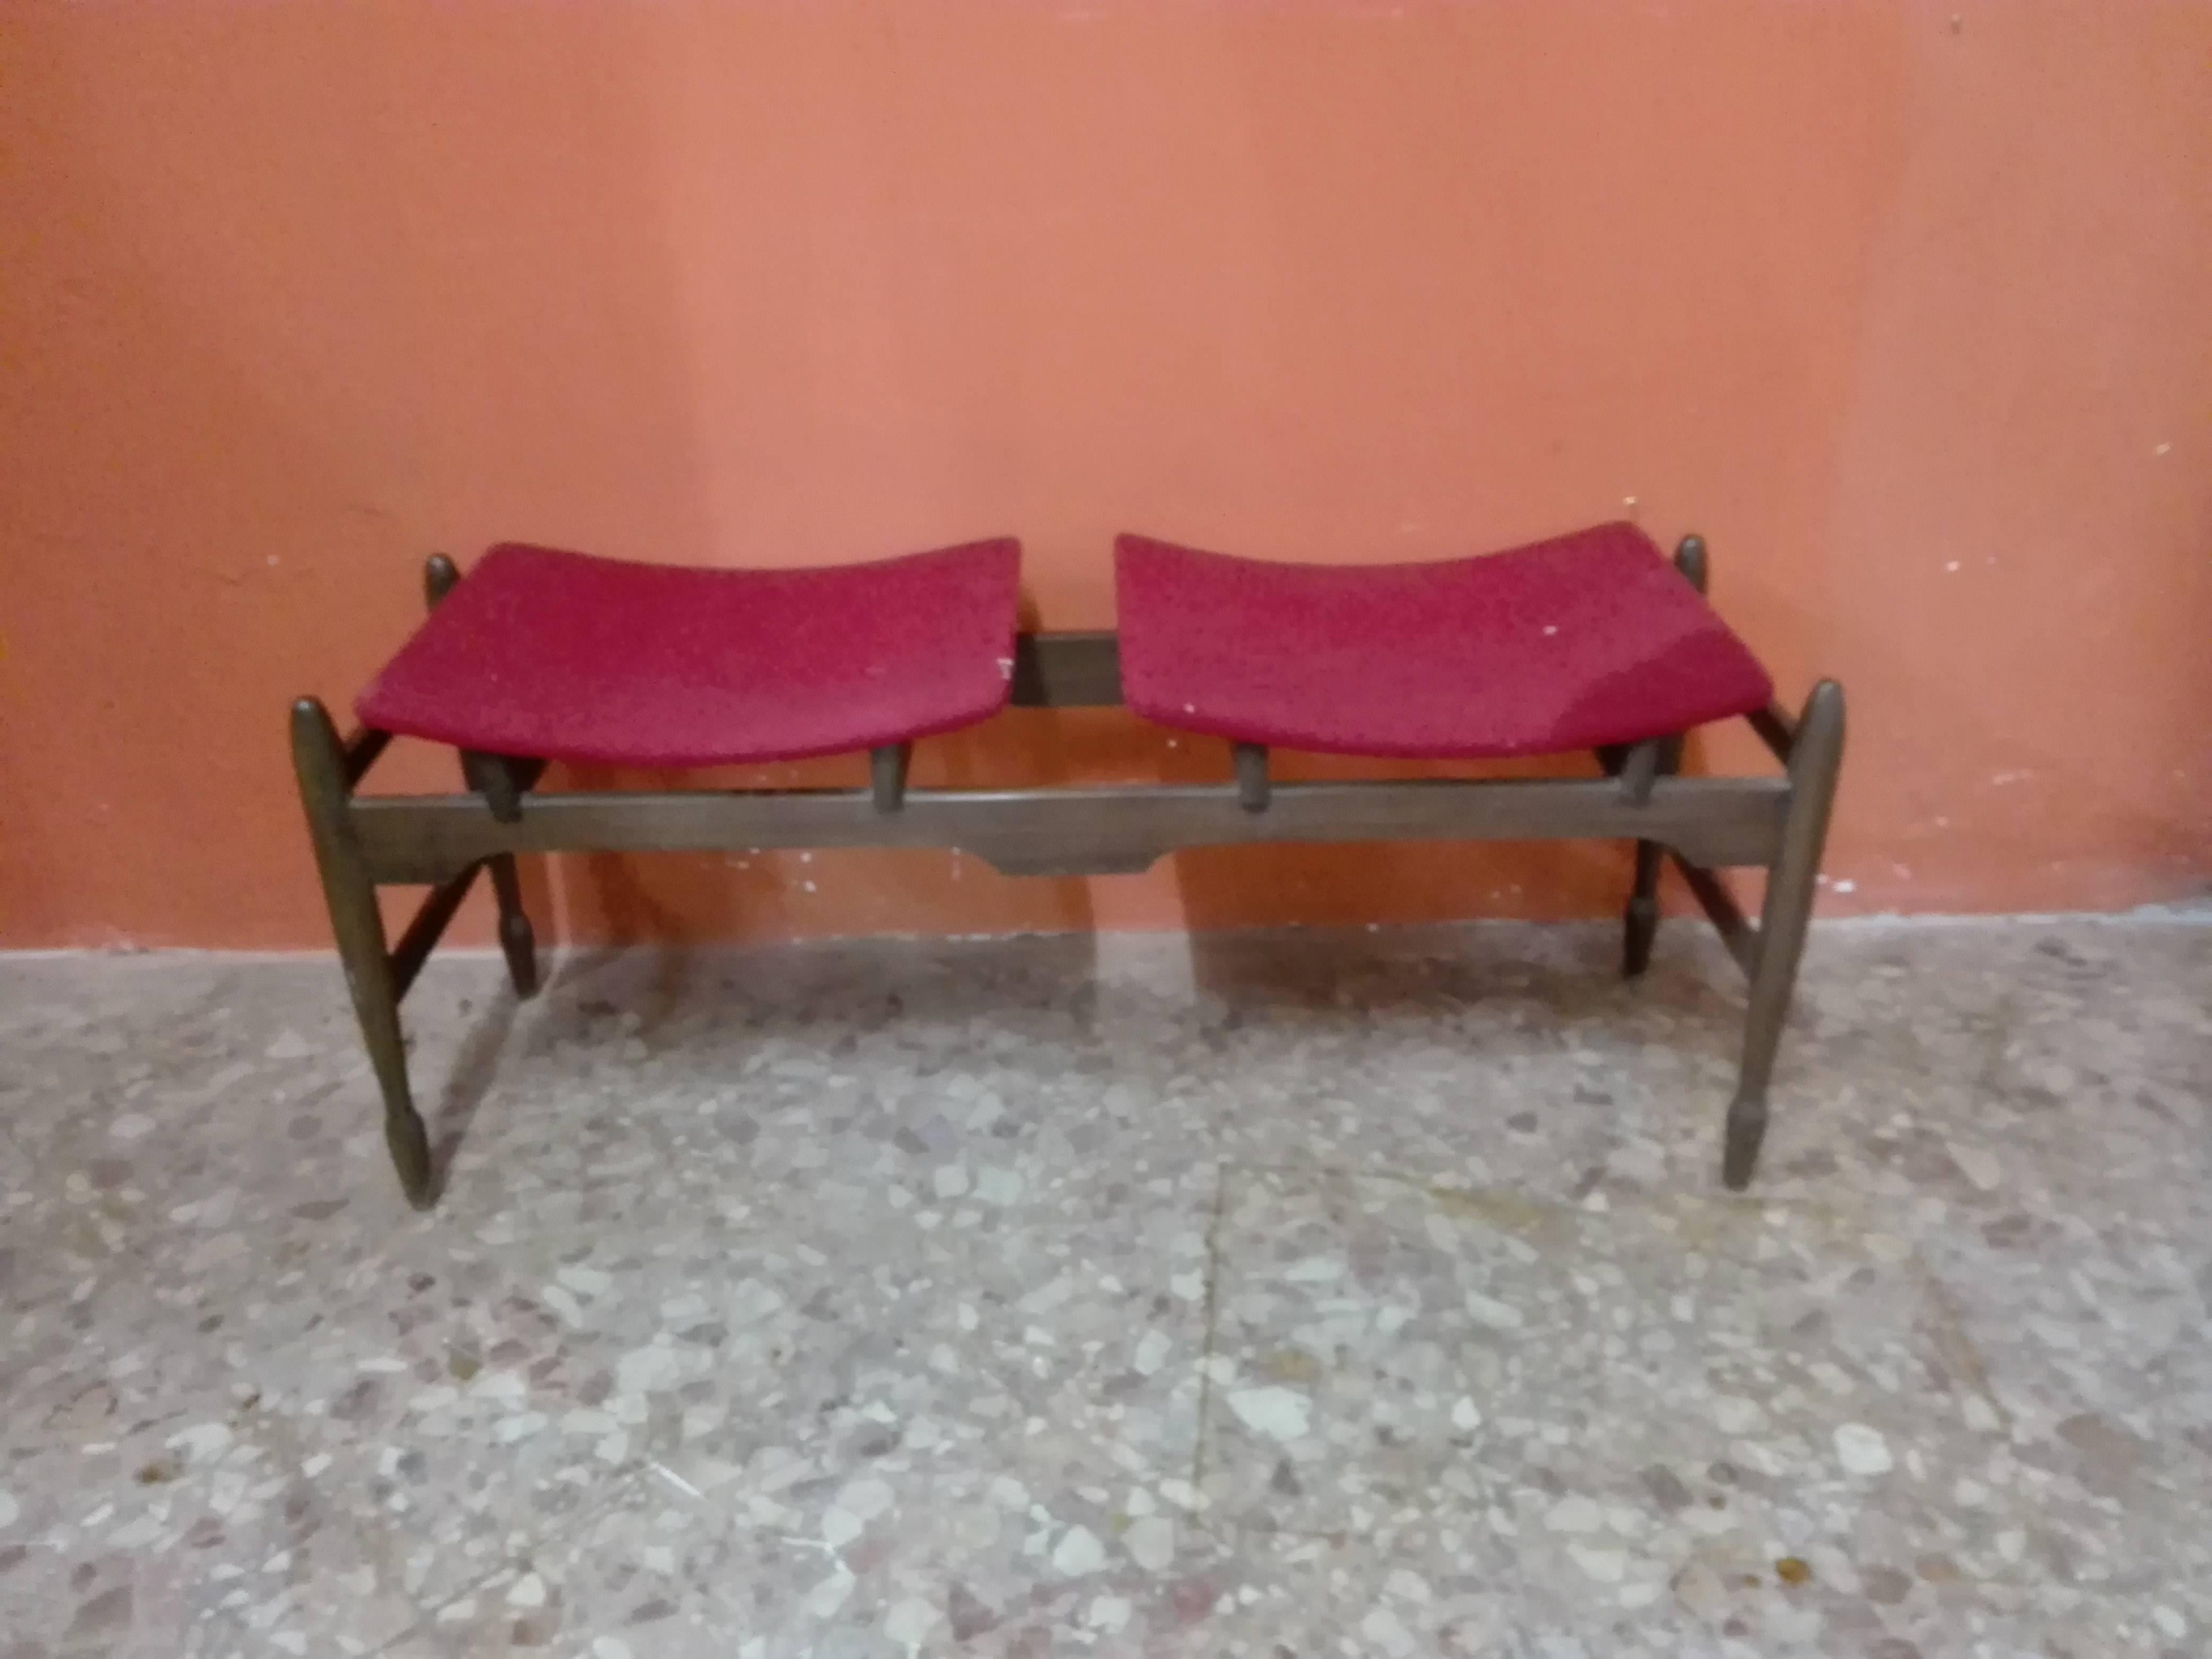 Two-seat bench with monomaterial and one-color coating, fabric covering, removable feet to facilitate shipping.